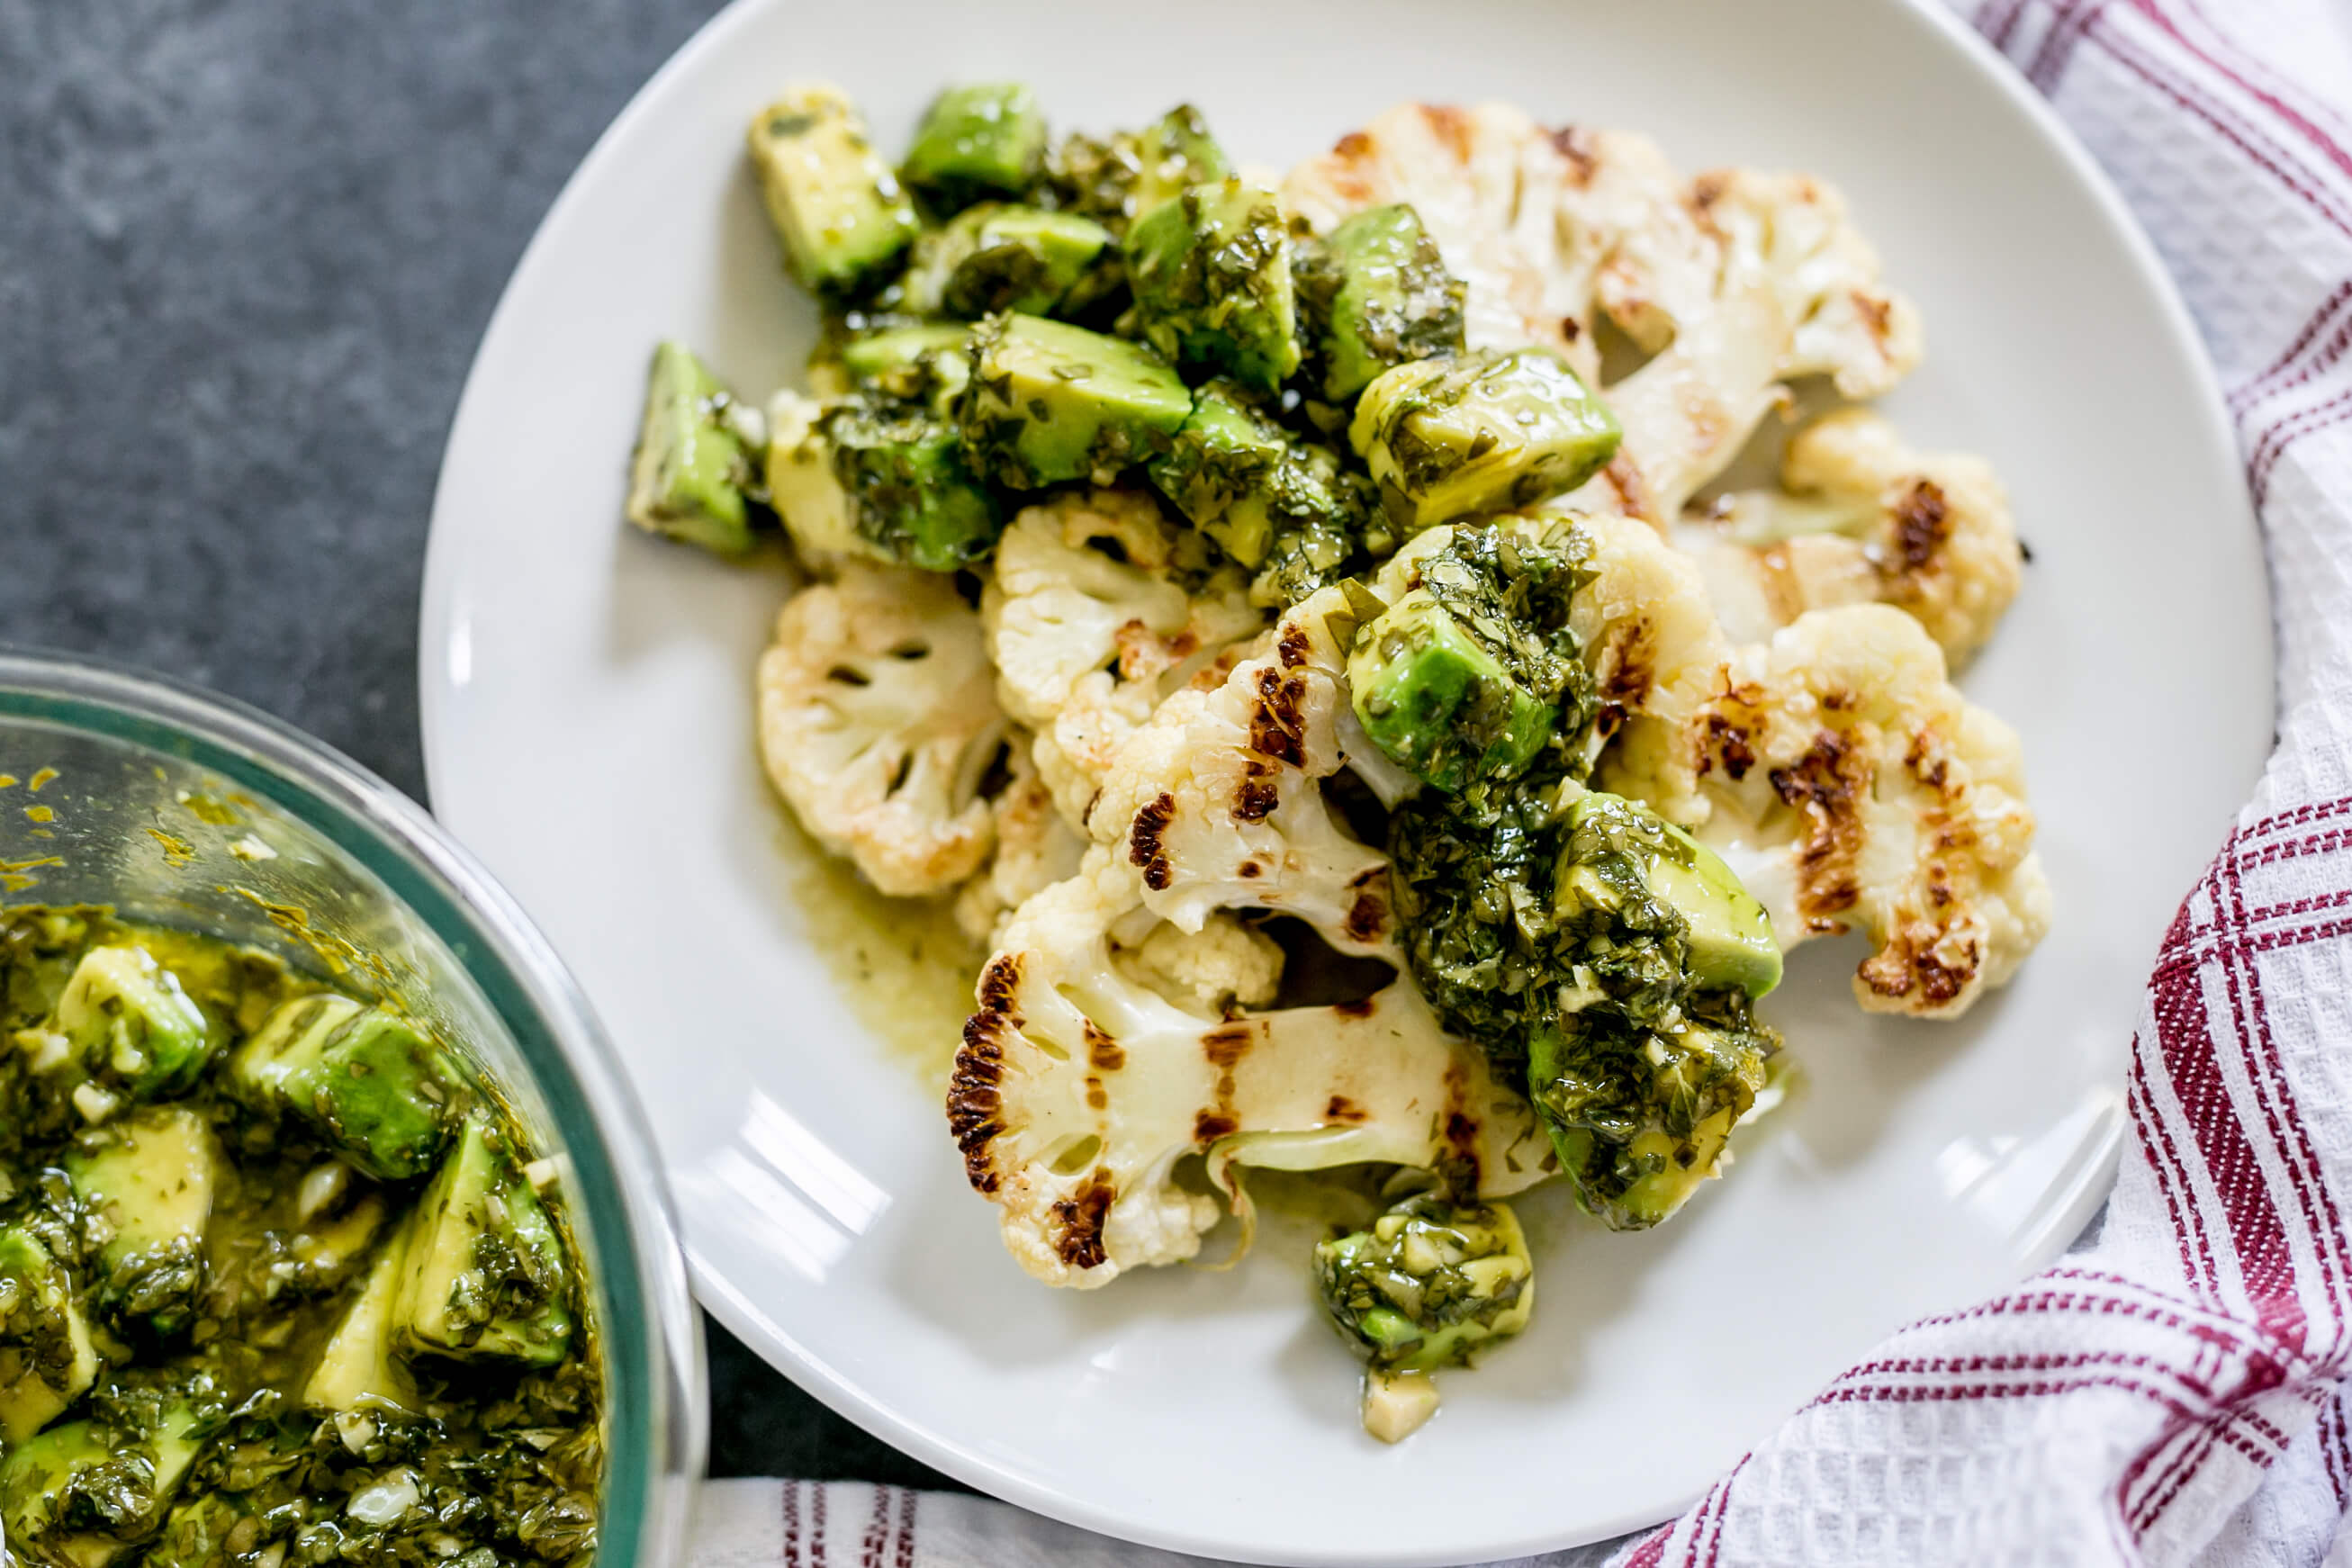 20 Summer-Inspired Meals Your Clients Will Love: Grilled Cauliflower Steaks with Avocado Chimichurri